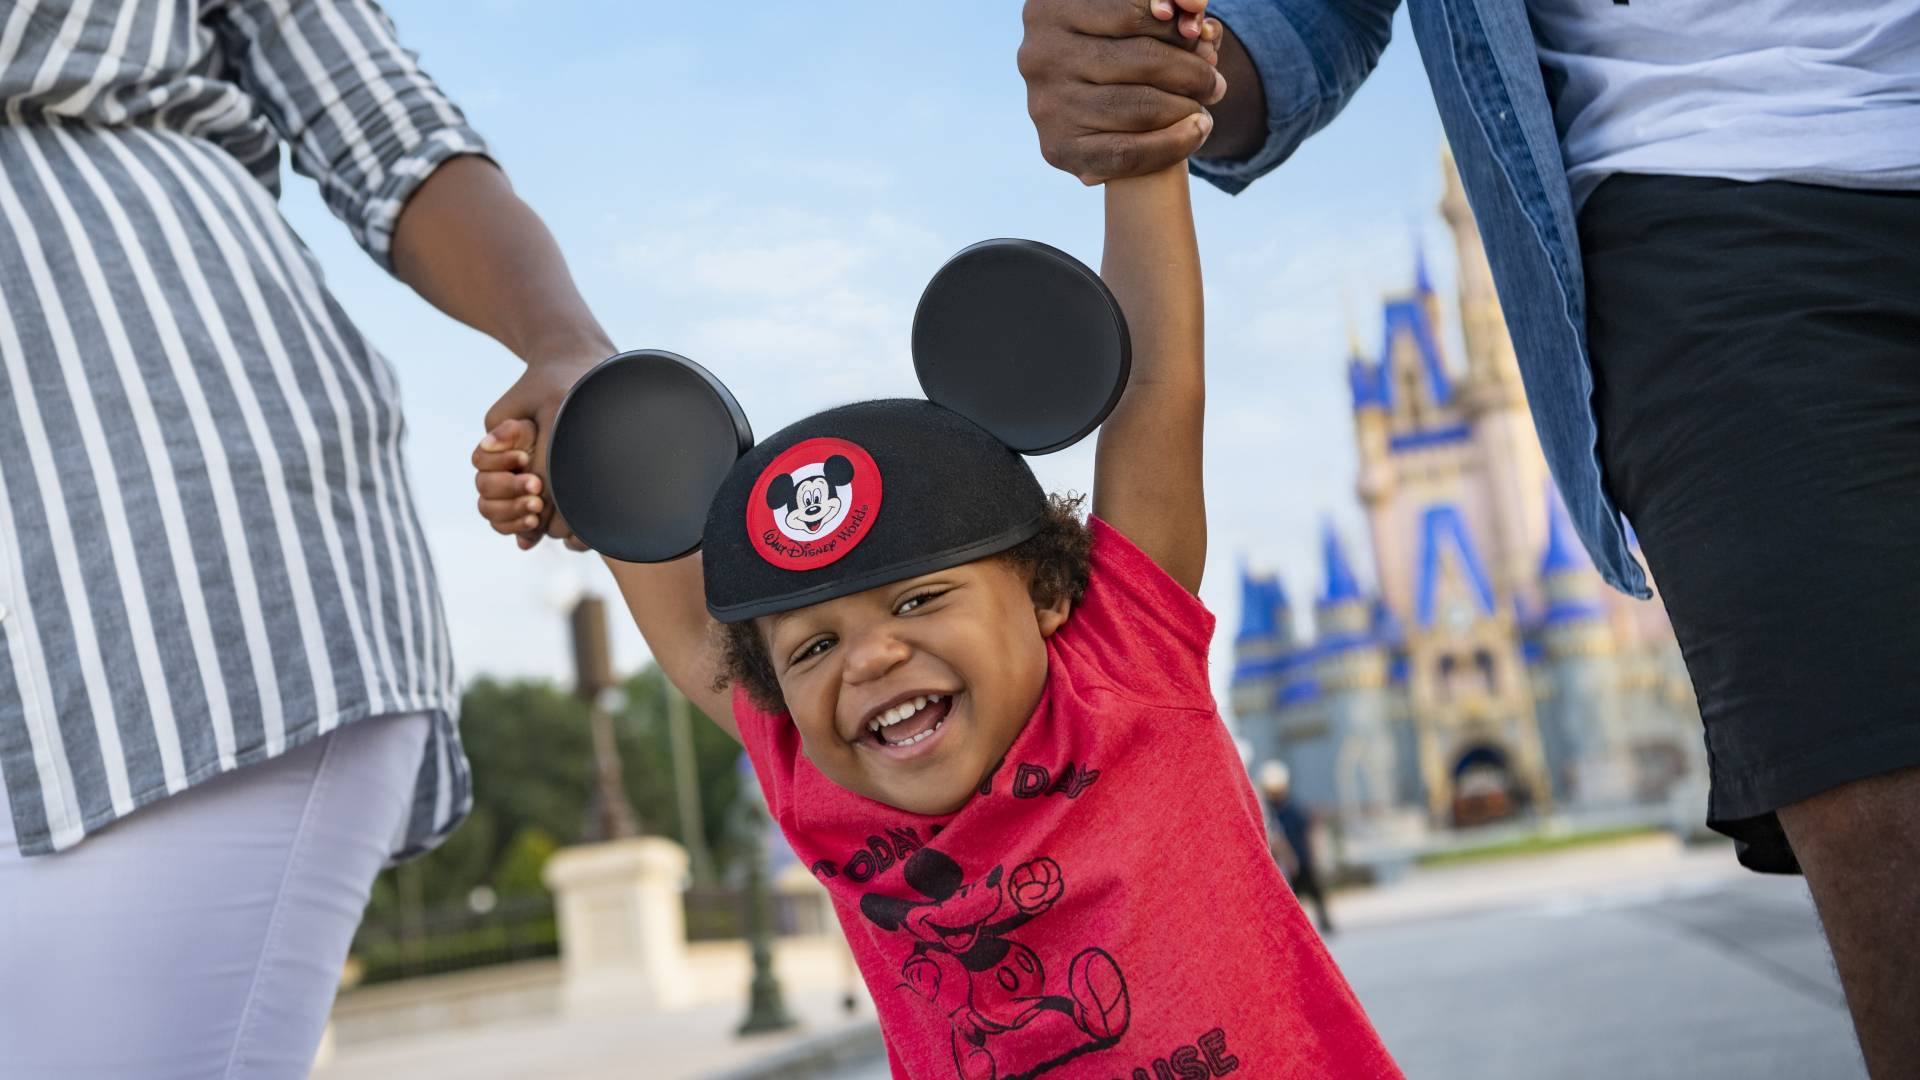 Child with Mickey Mouse ears near Enchanted Castle